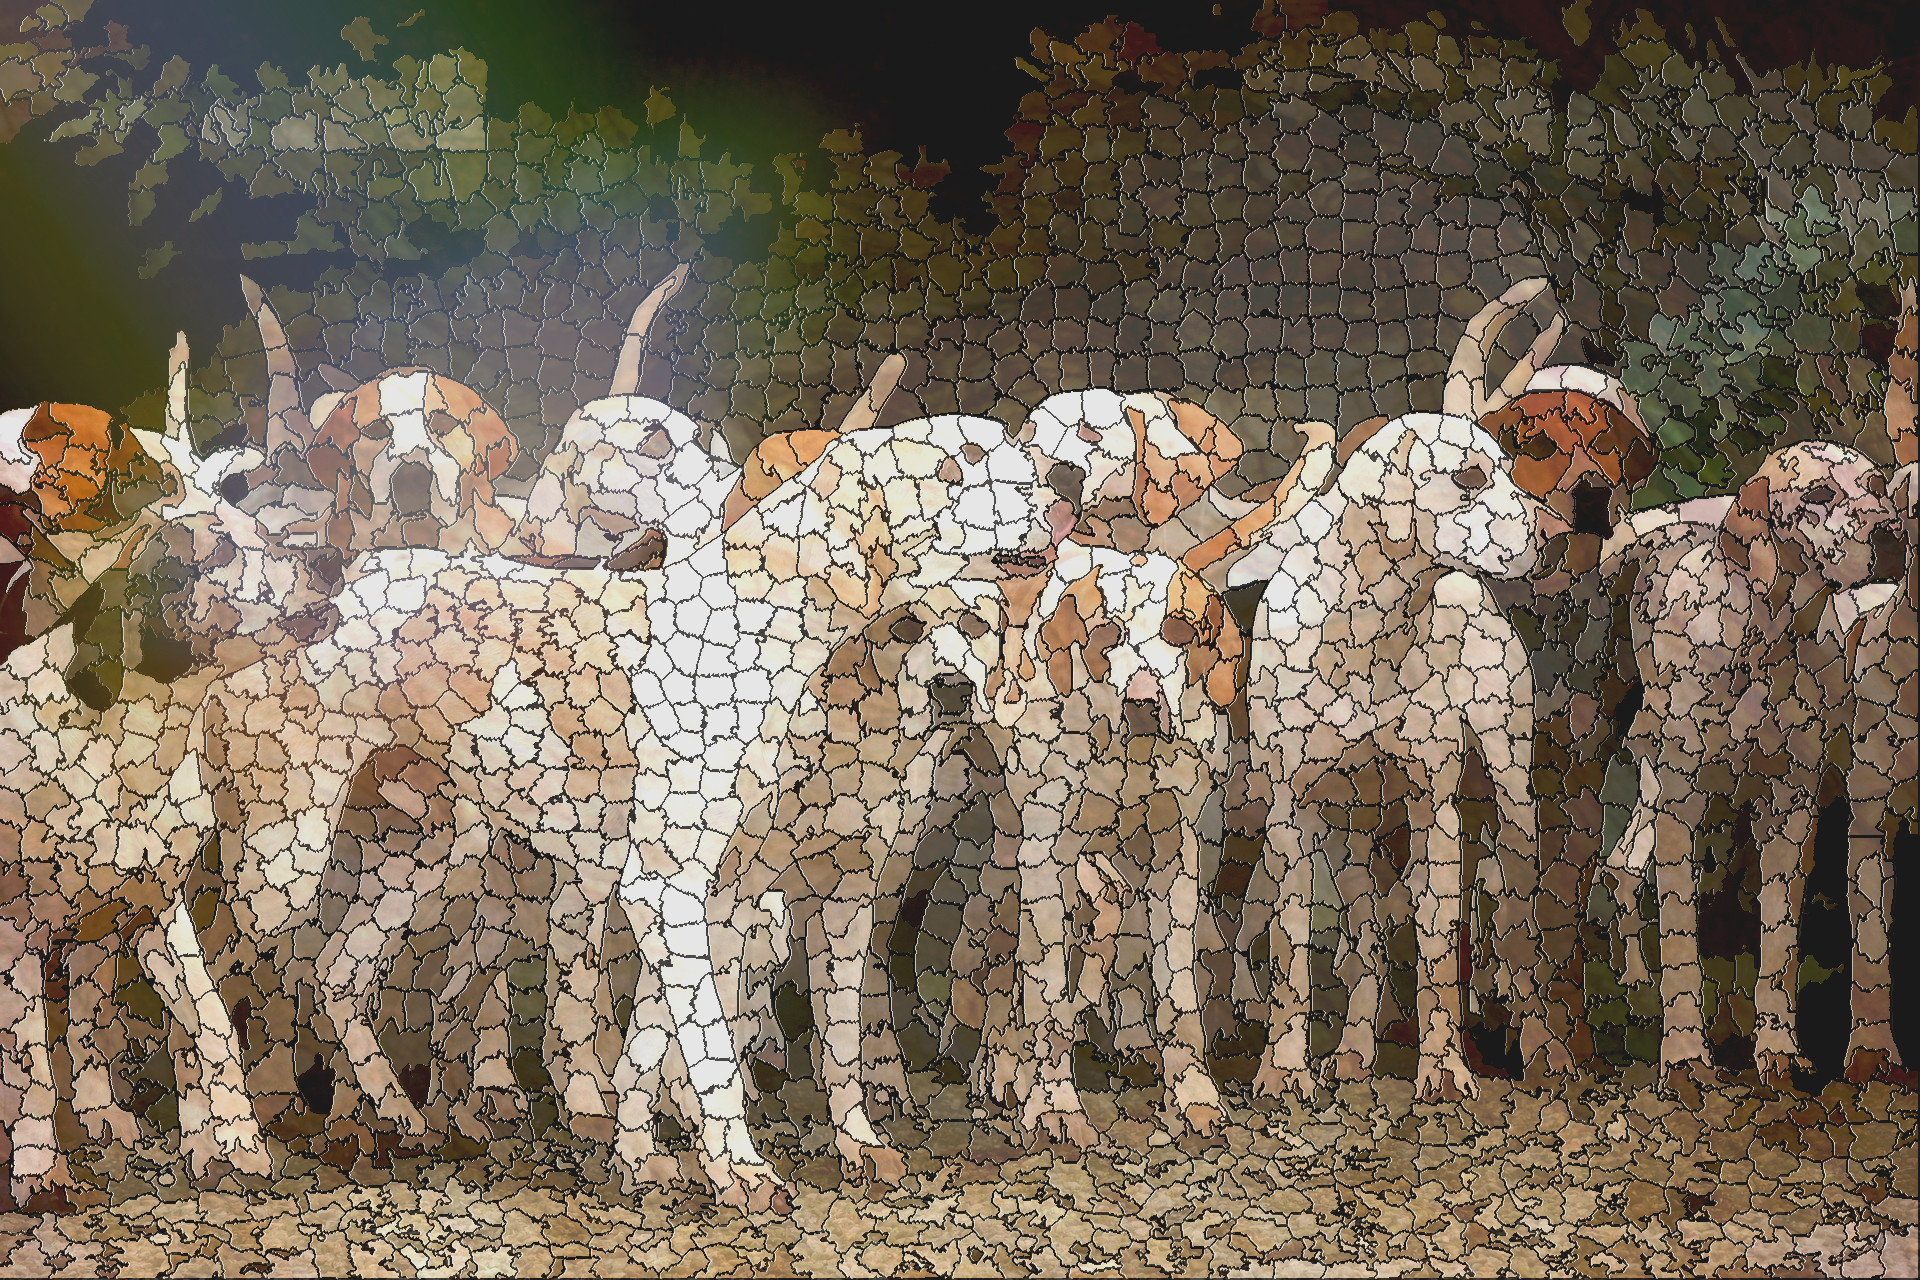 2023-09-02 17-32-09dogs-2691871_1920 with a simple mosaic effect.jpeg